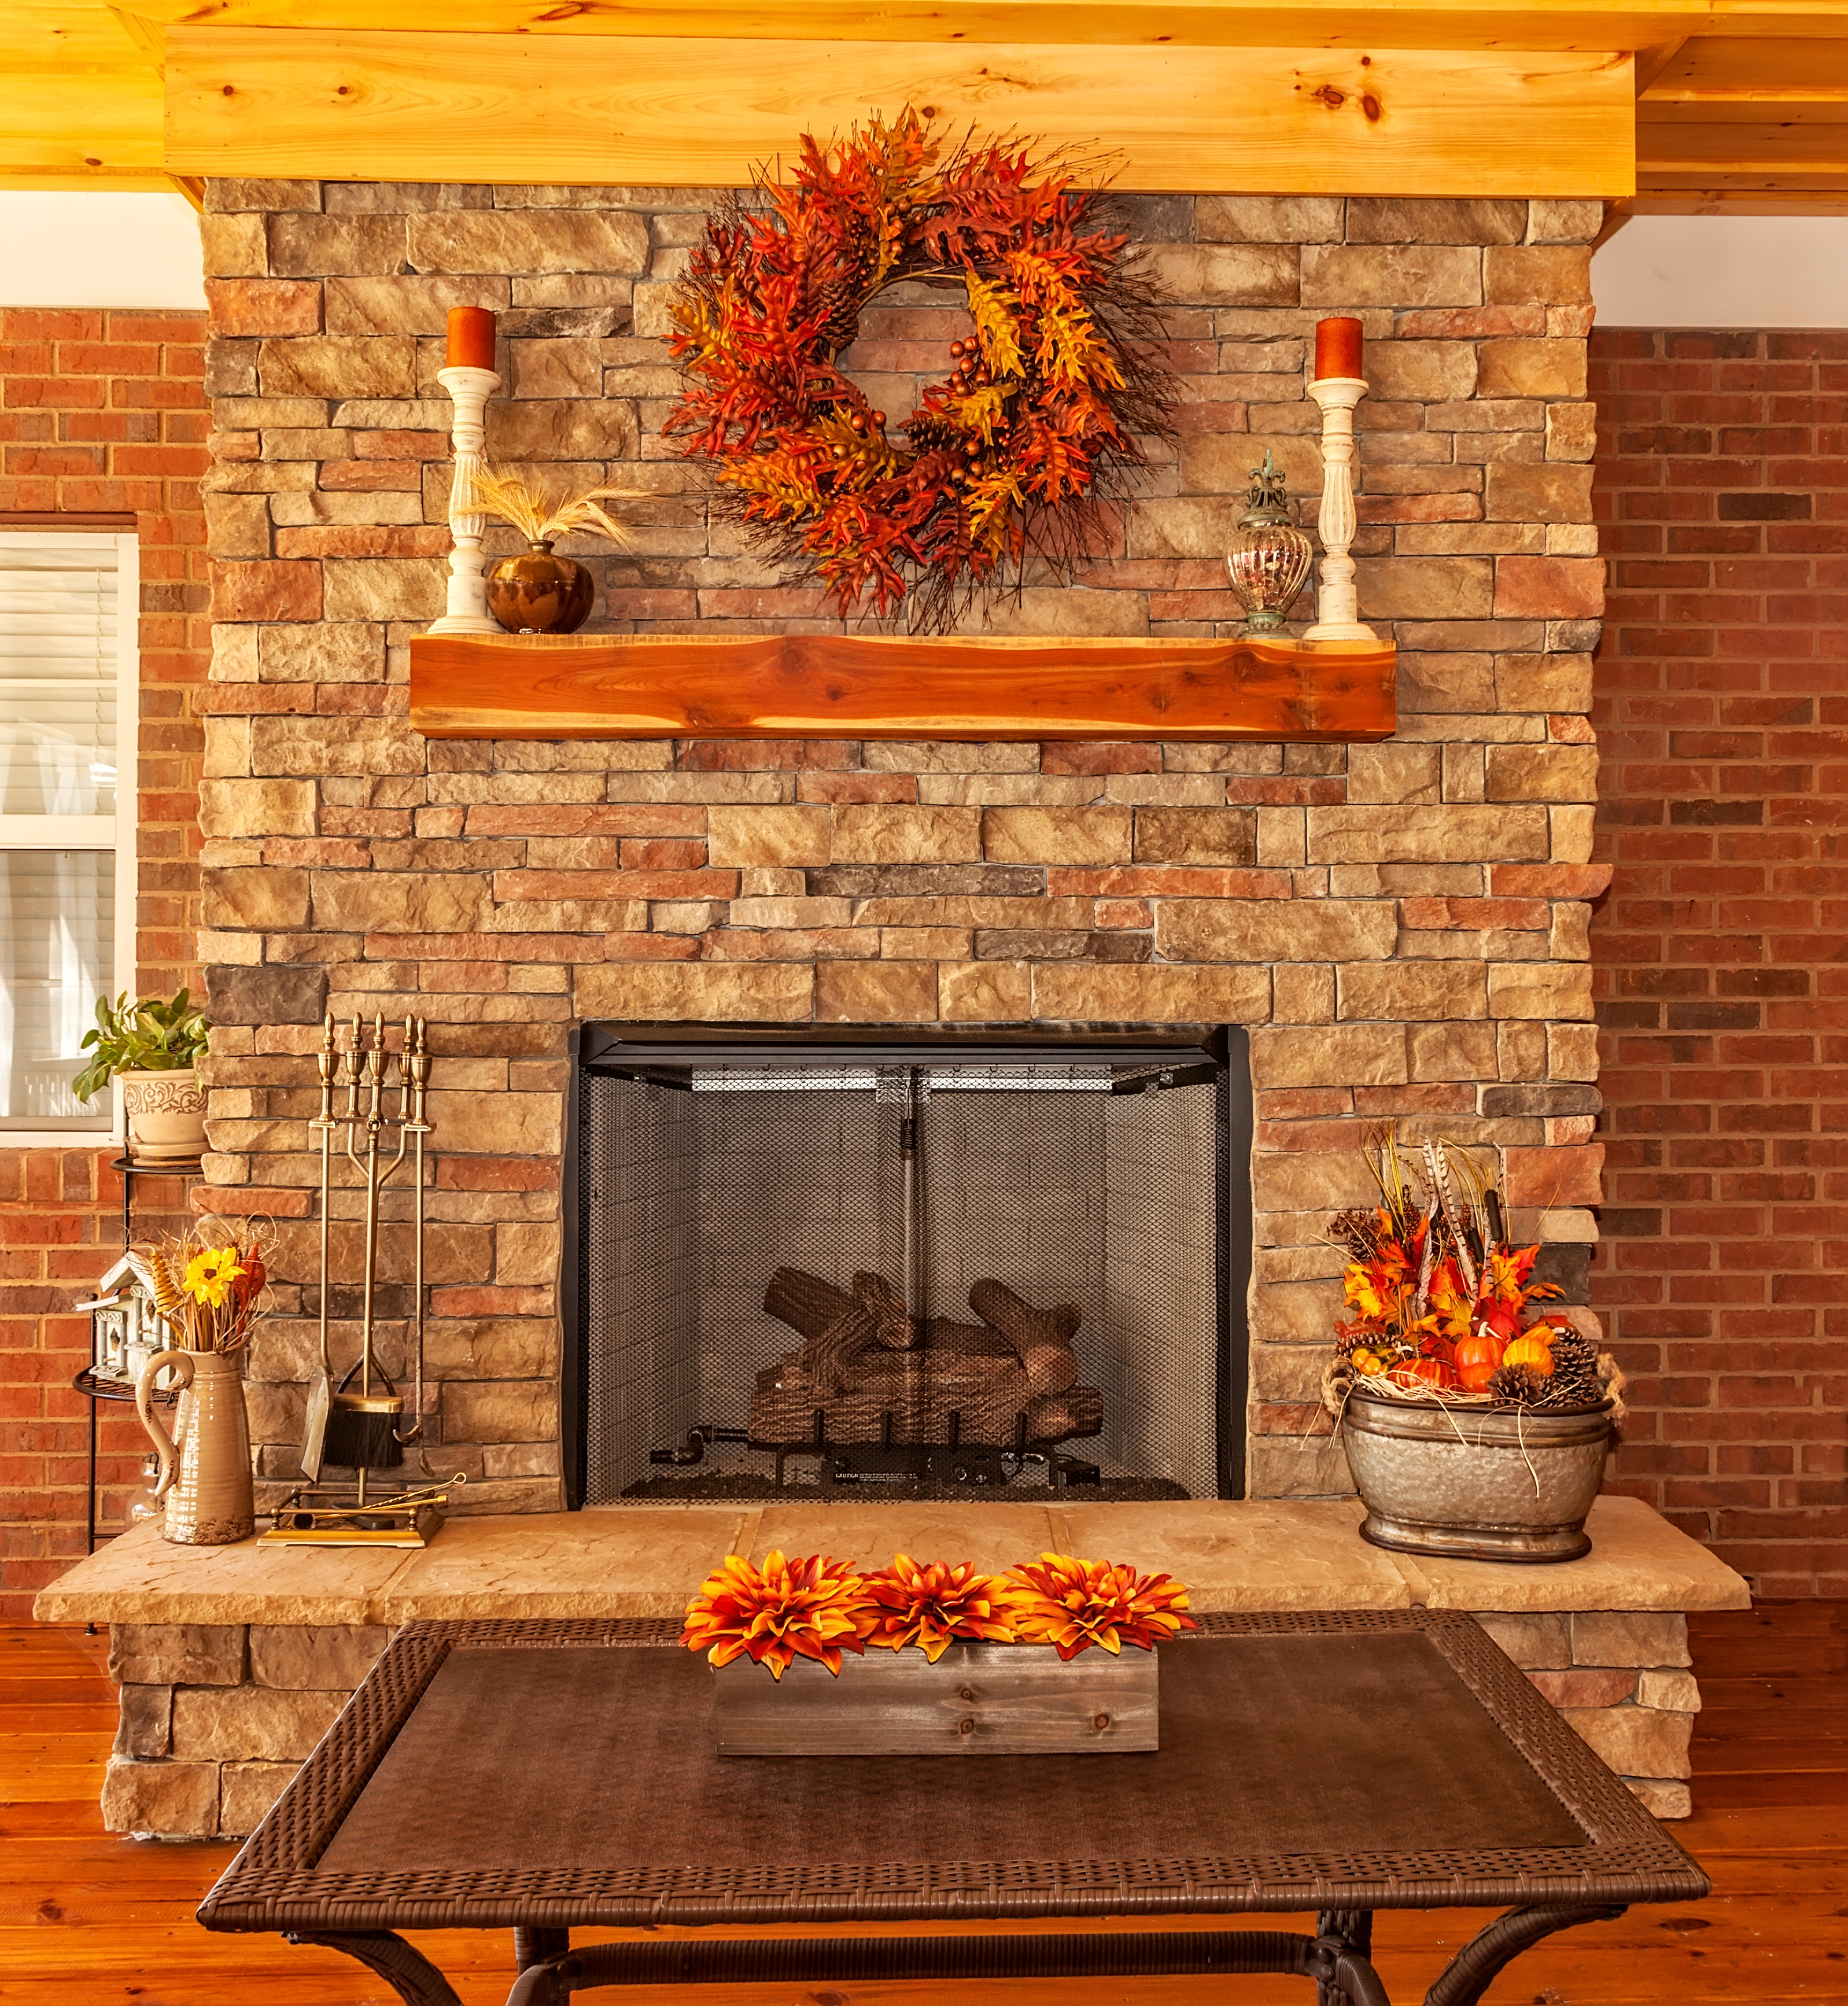 5 Fall Mantel Decorating Ideas That'll Make You Look Like a Pro 54